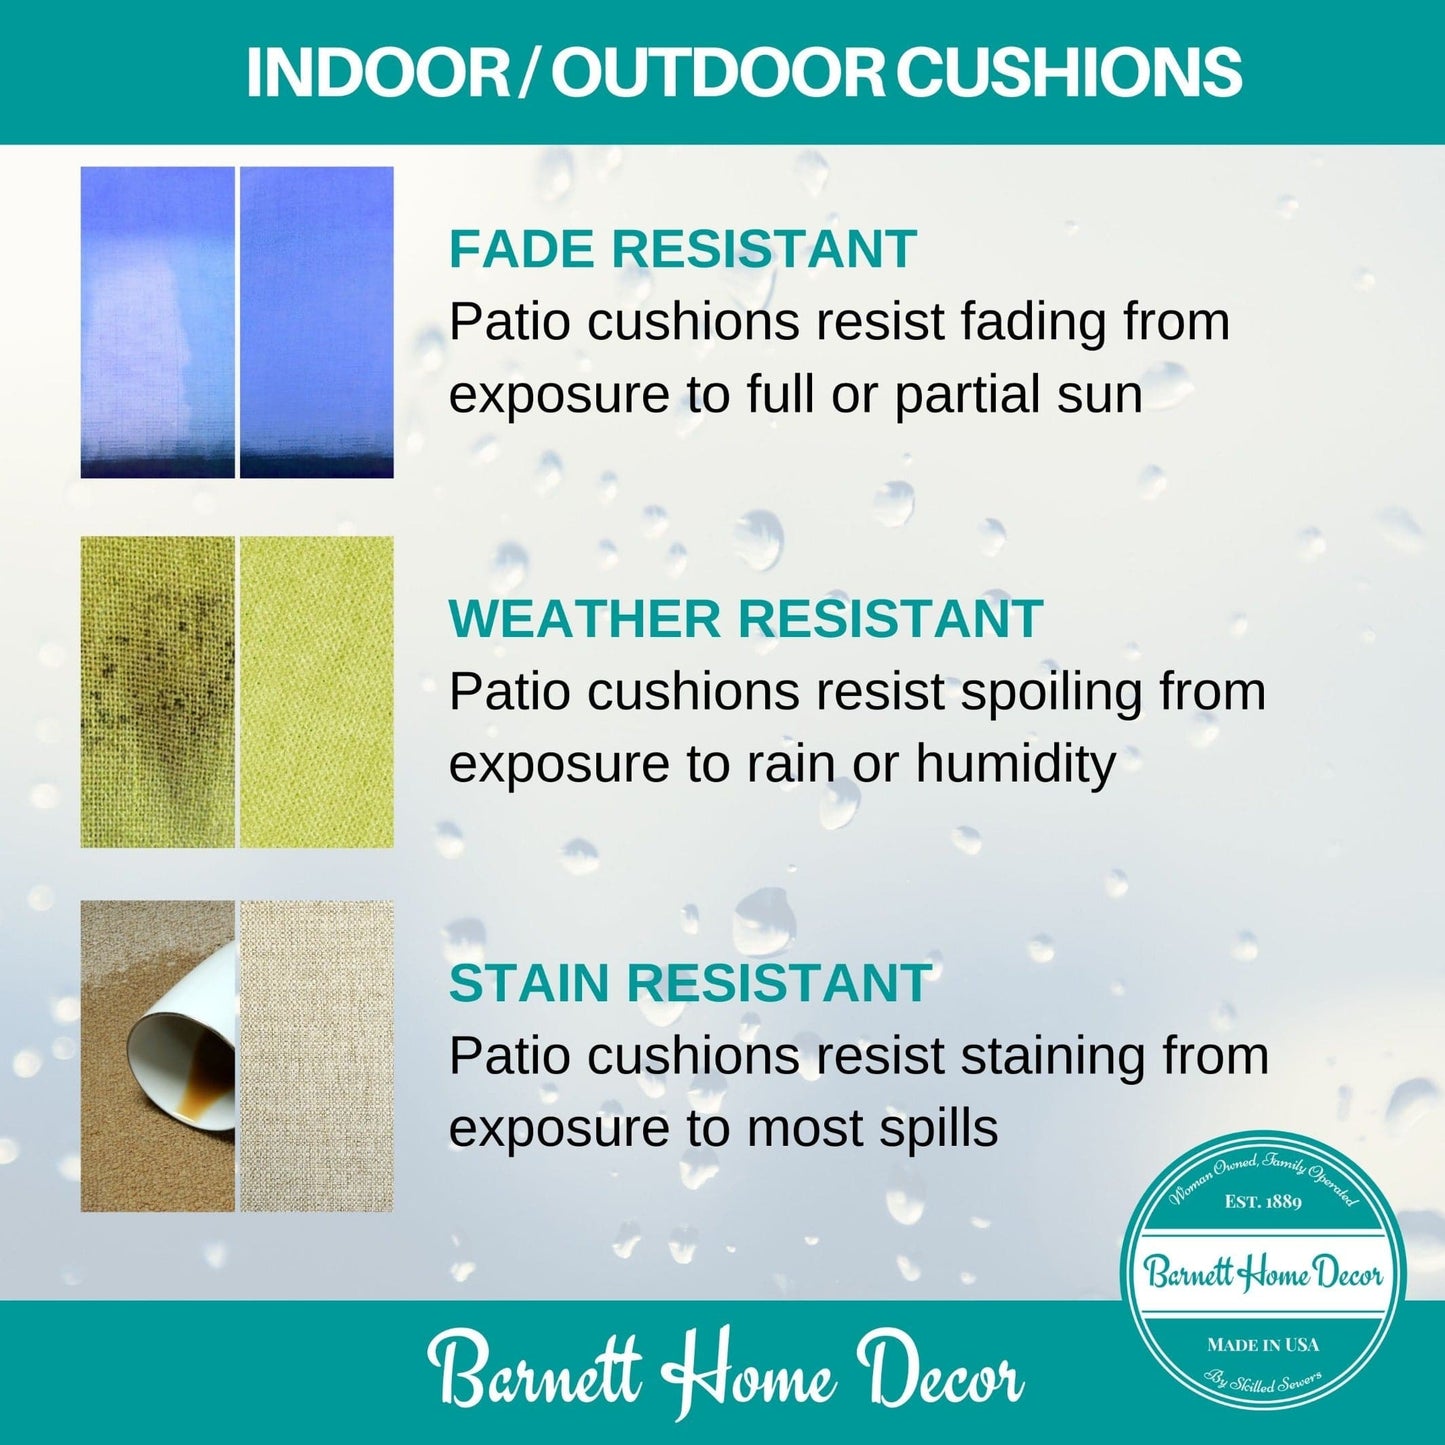 Indoor/Outdoor Cushions - Fade Resistant - Weather Resistant - Stain Resistant